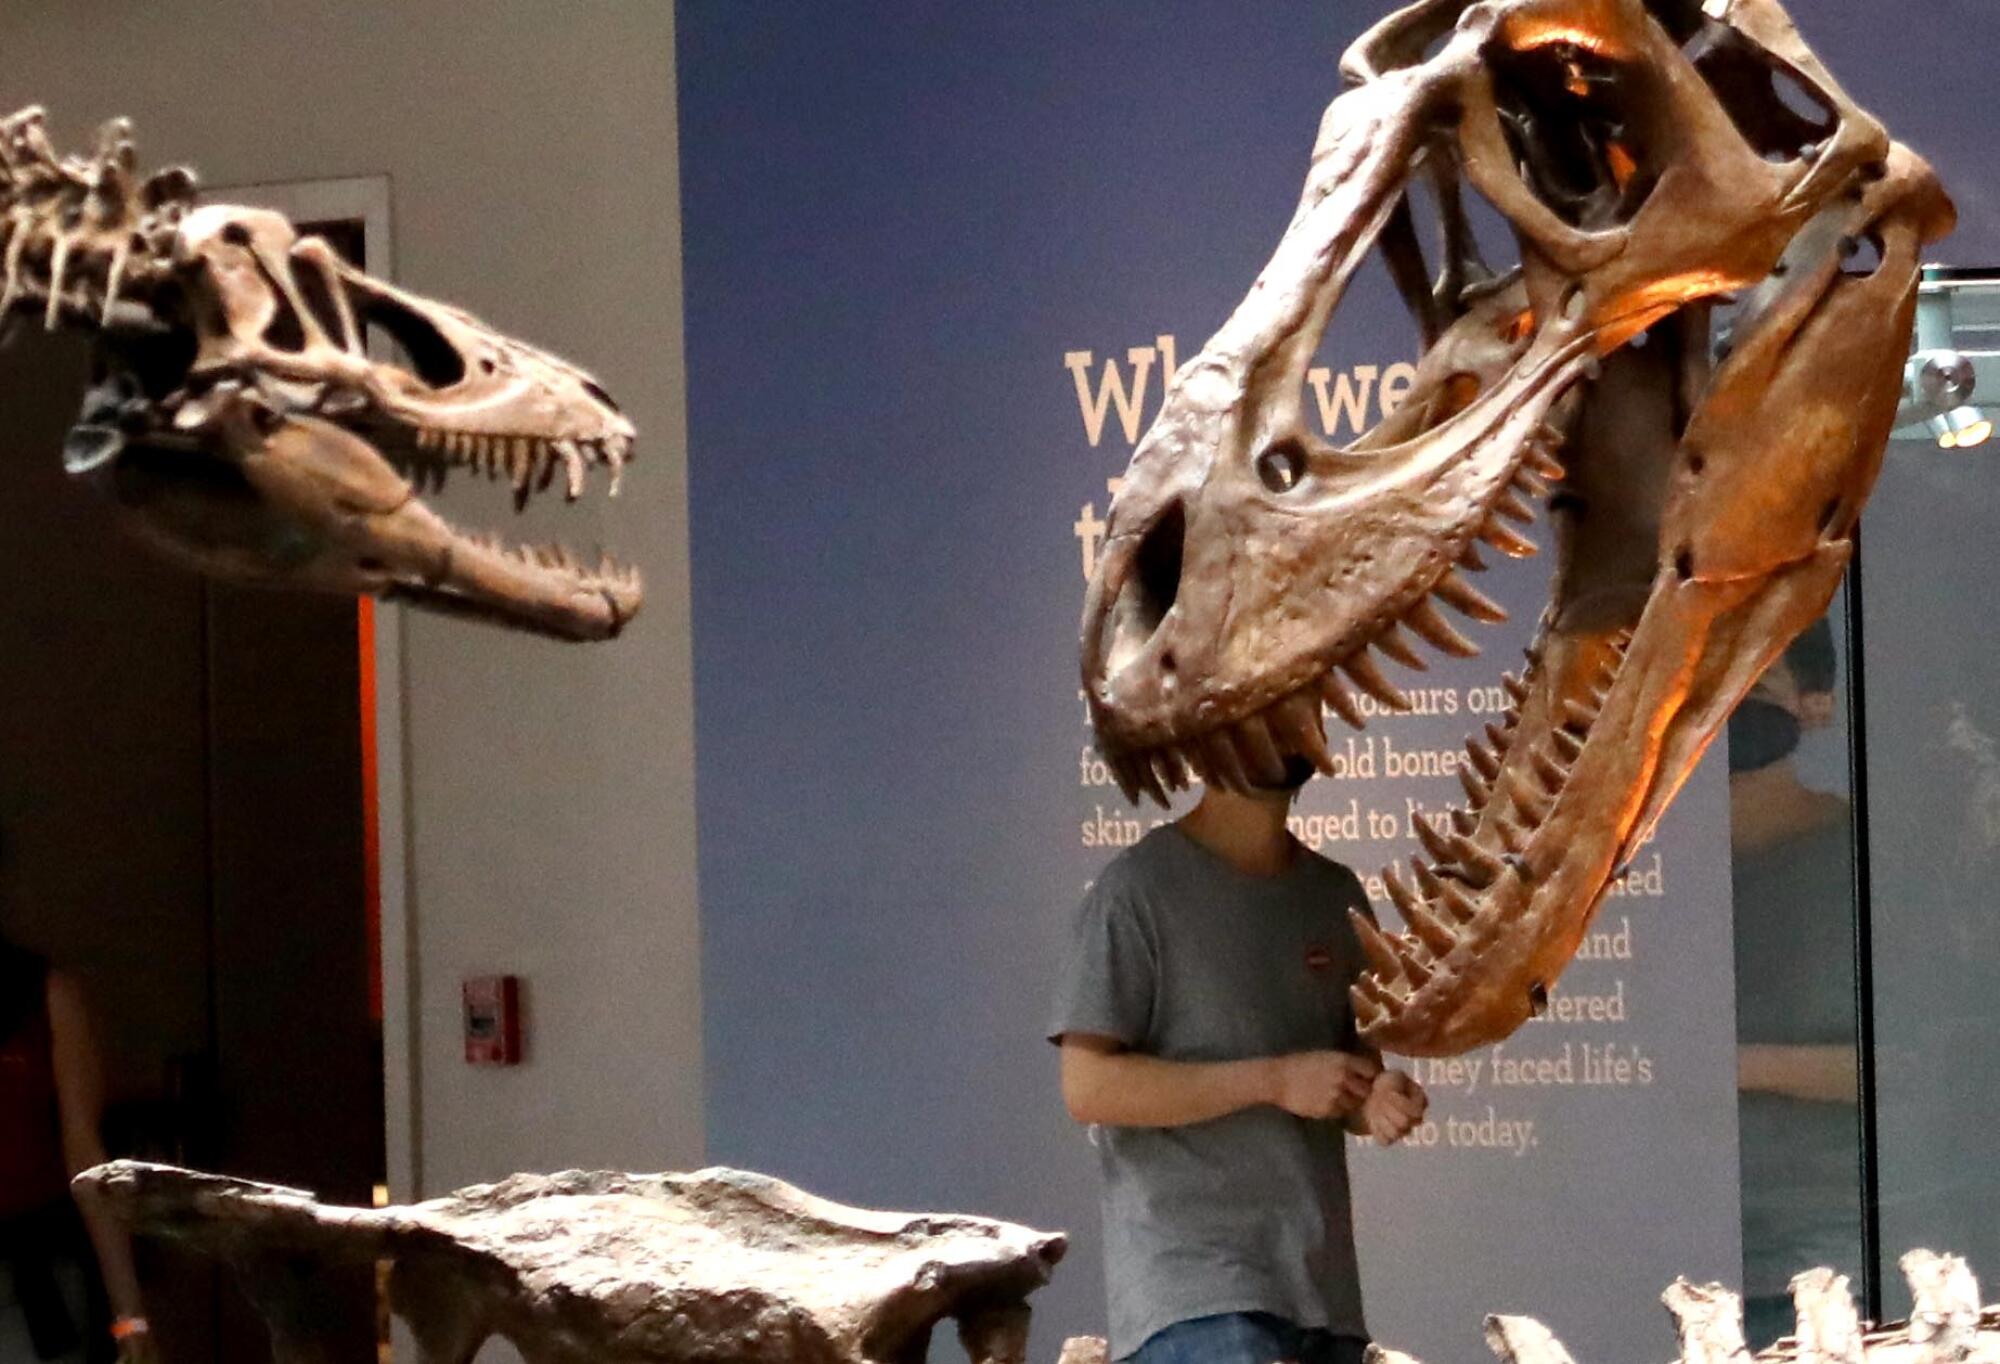 A dinosaur's head appears about to bite off the head of a visitor at the Natural History Museum.